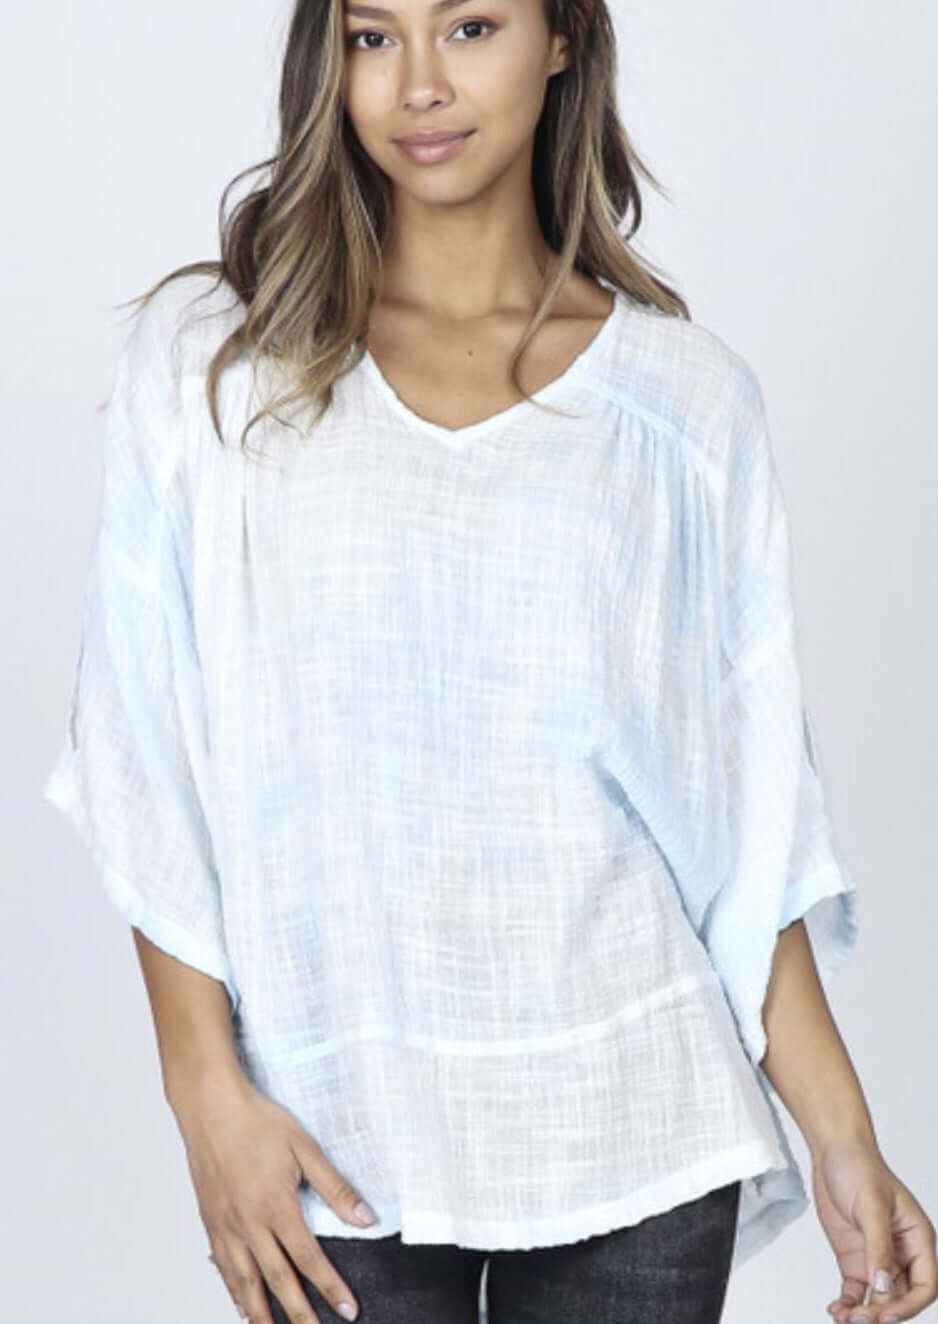 M. Rena Ladies Comfy Cotton Blend V-Neck Gauze Top Made in USA with the finest quality fabrics | Light Blue & White Tie Dye | Women's Made in America Boutique